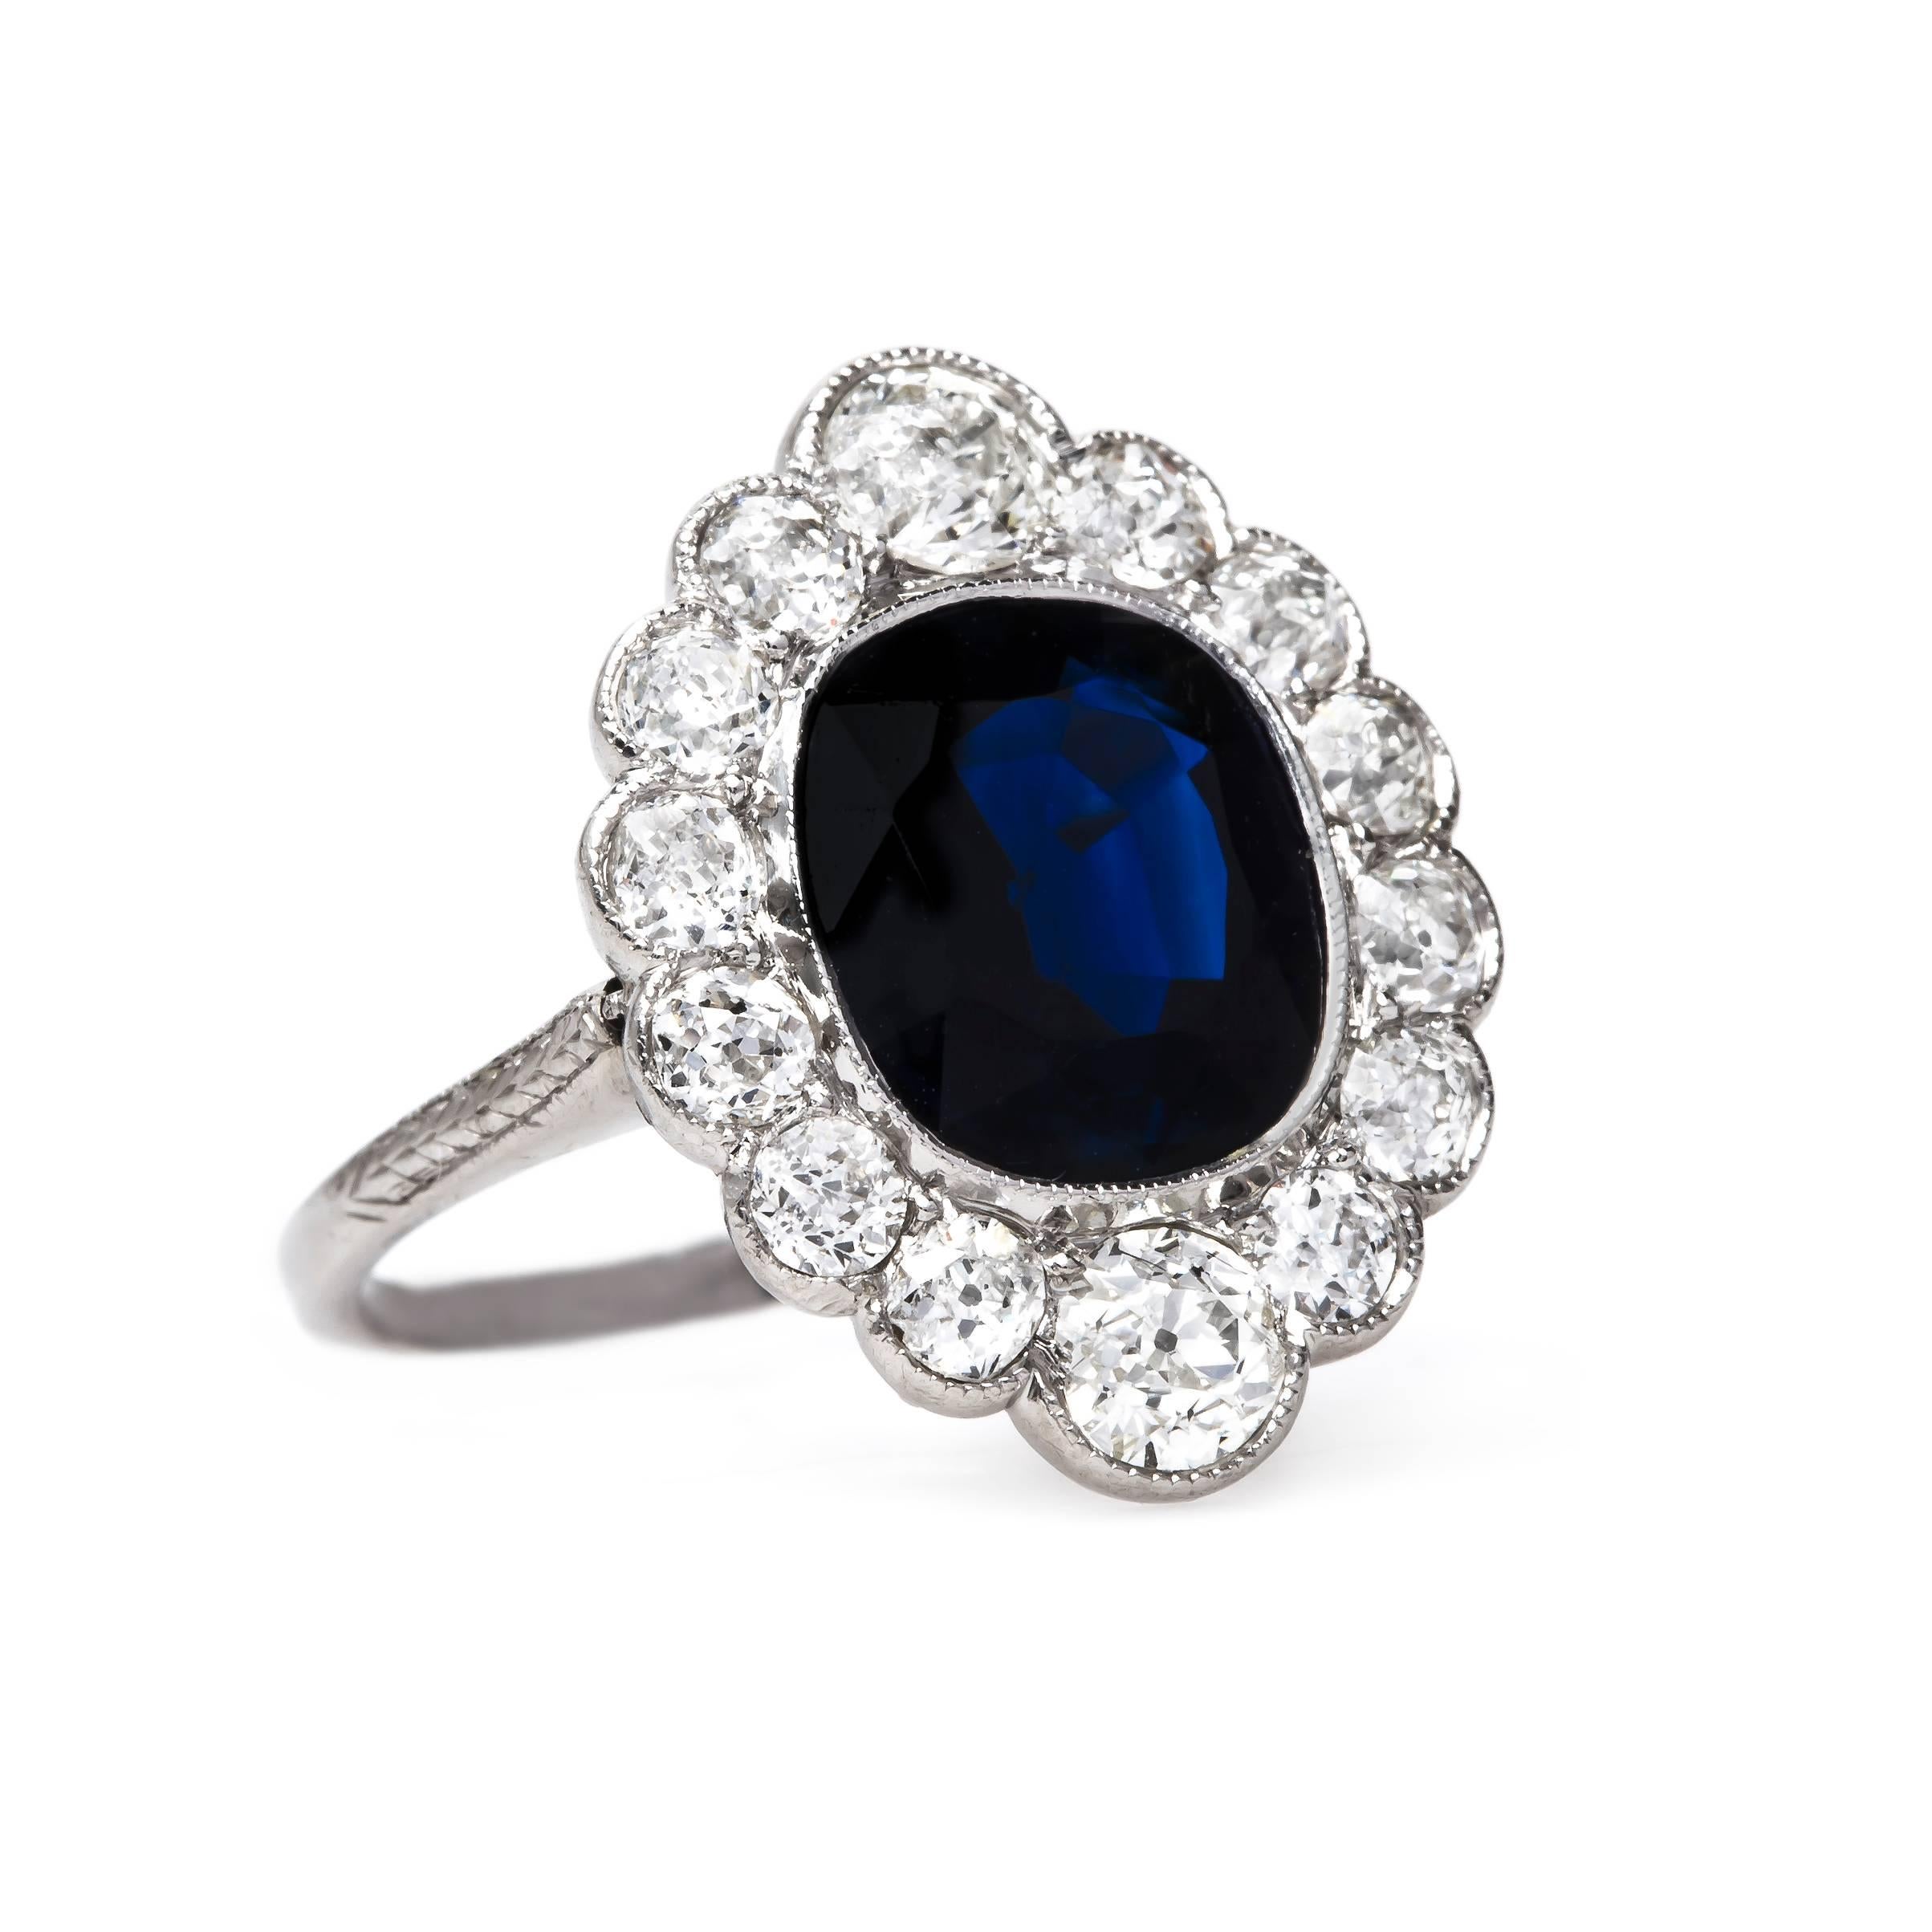 Long Grove is an exceptional and authentic Edwardian (circa 1915) platinum engagement ring. This incredibly romantic ring centers a Cushion Cut natural sapphire gauged at approximately 4.10cts accompanied by a Guild Laboratories certificate stating